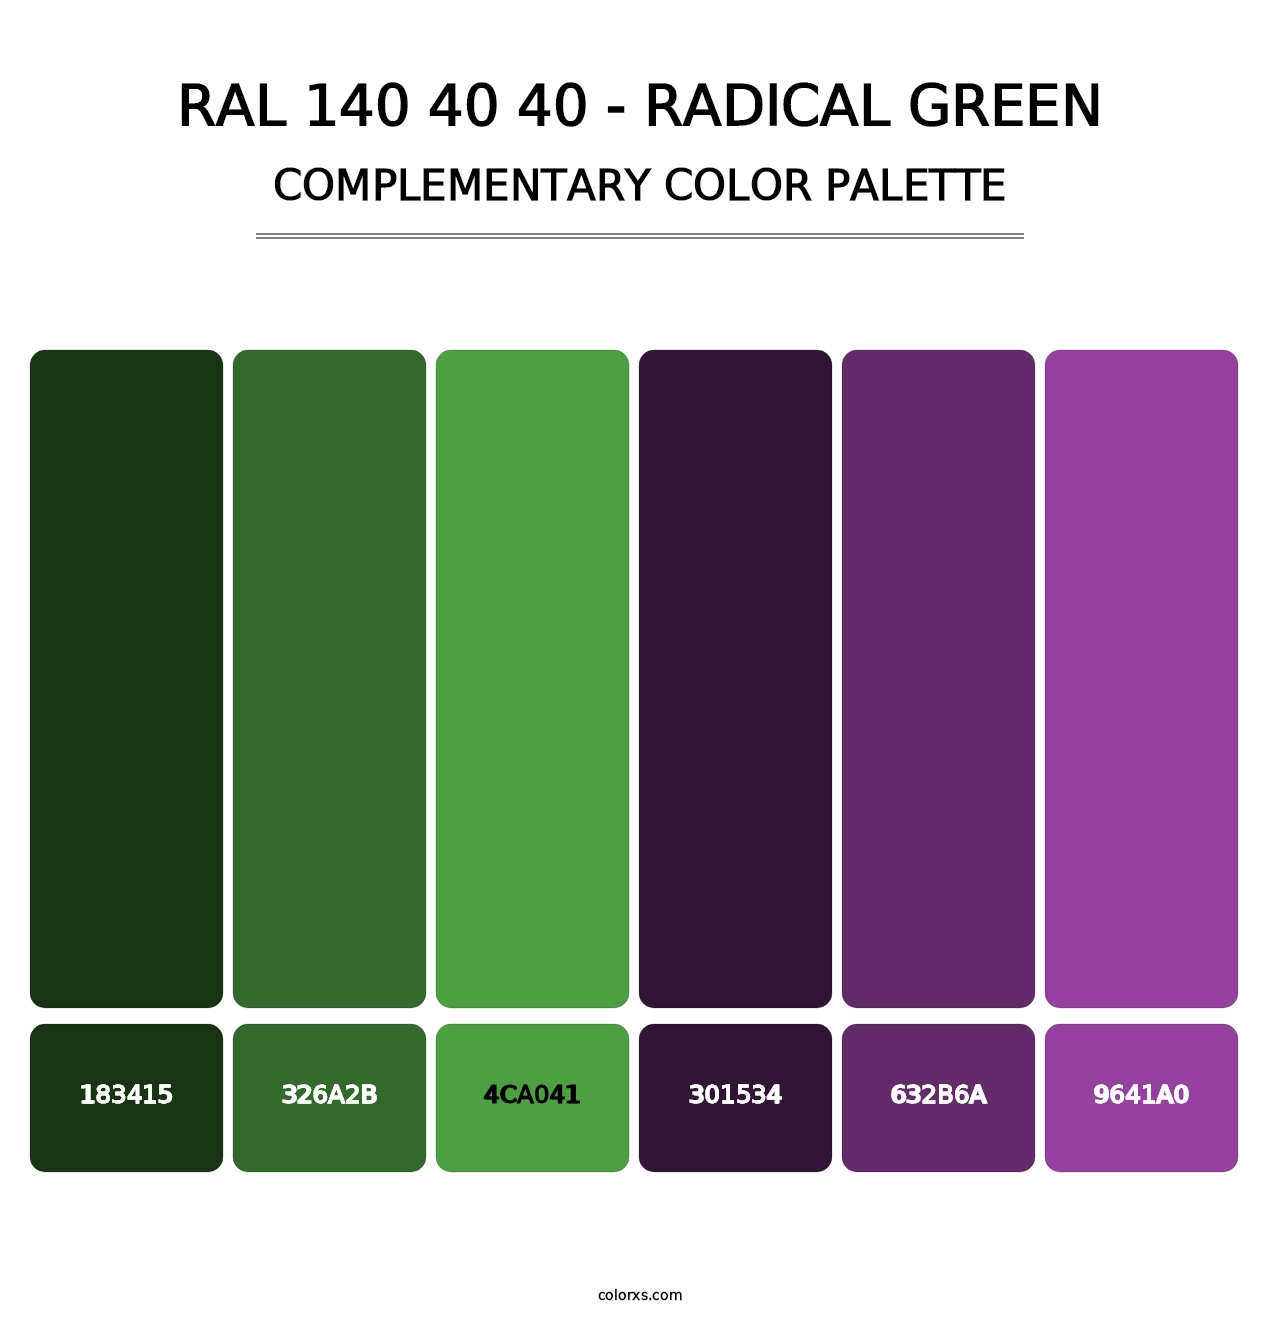 RAL 140 40 40 - Radical Green - Complementary Color Palette